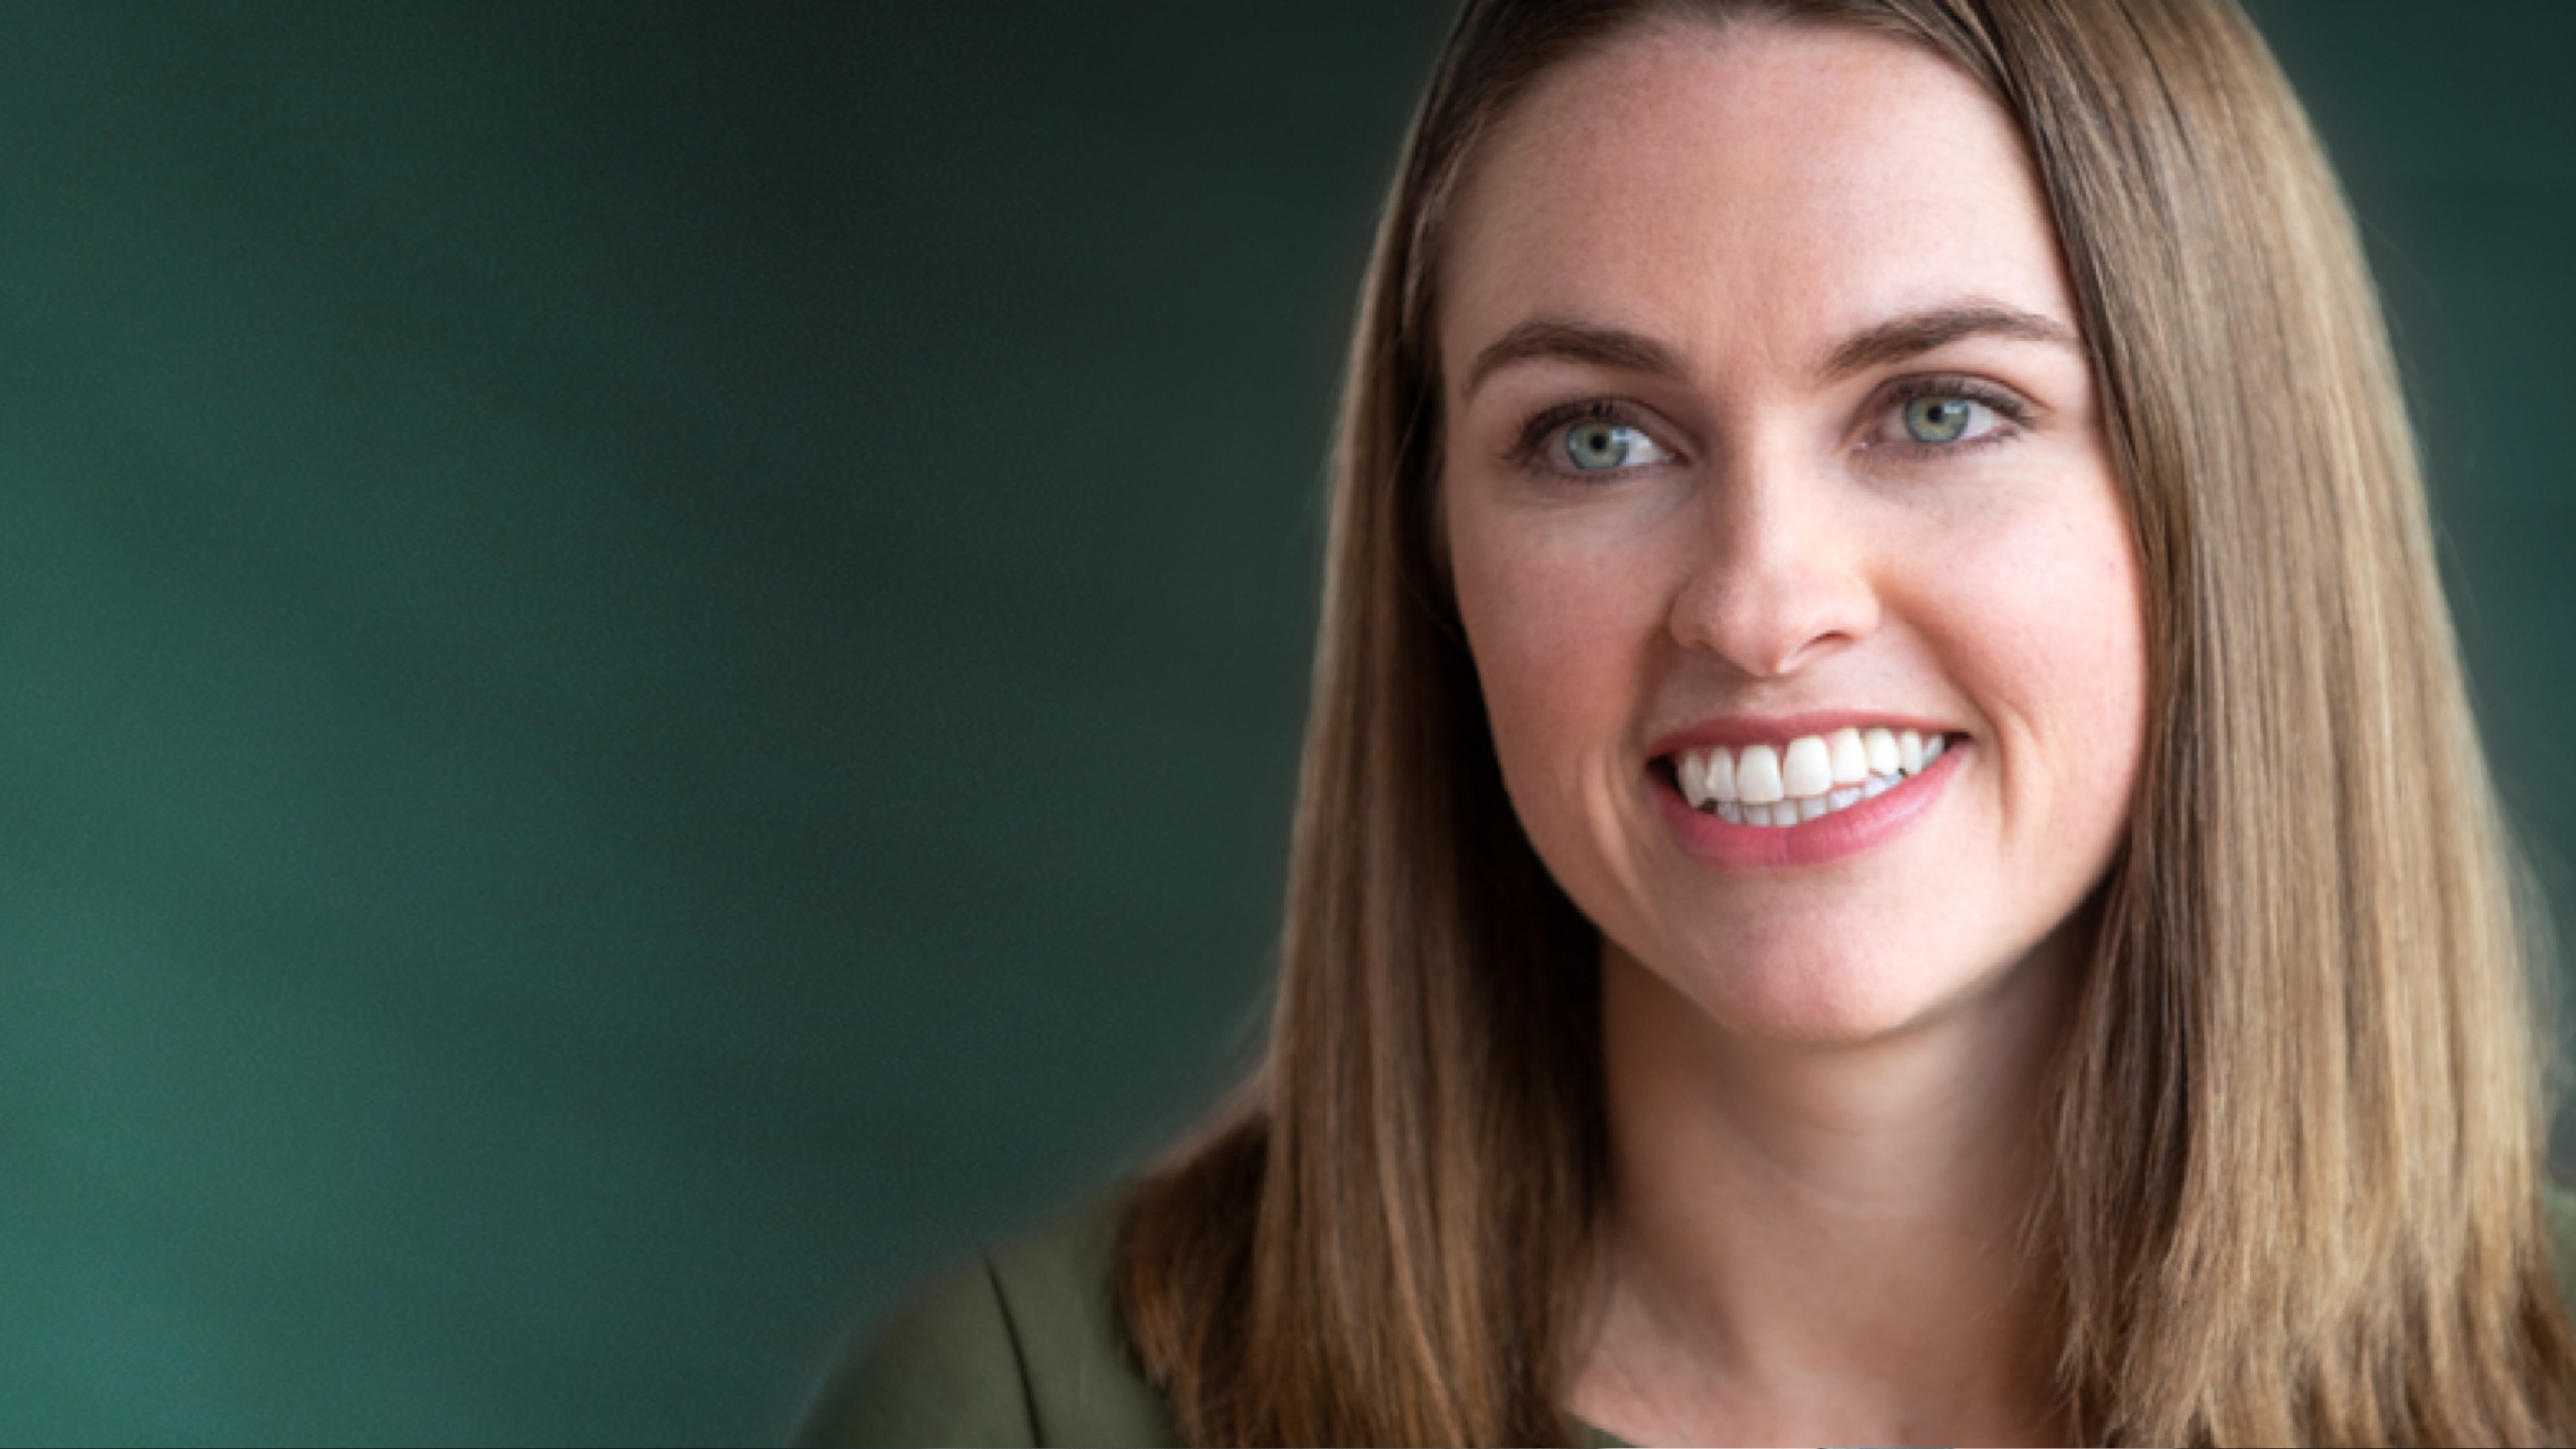 Molly Concannon, head of equity product at Vanguard, who is featured in this video, along with Matthew Brancato, chief client officer for Vanguard Institutional Investor Group.